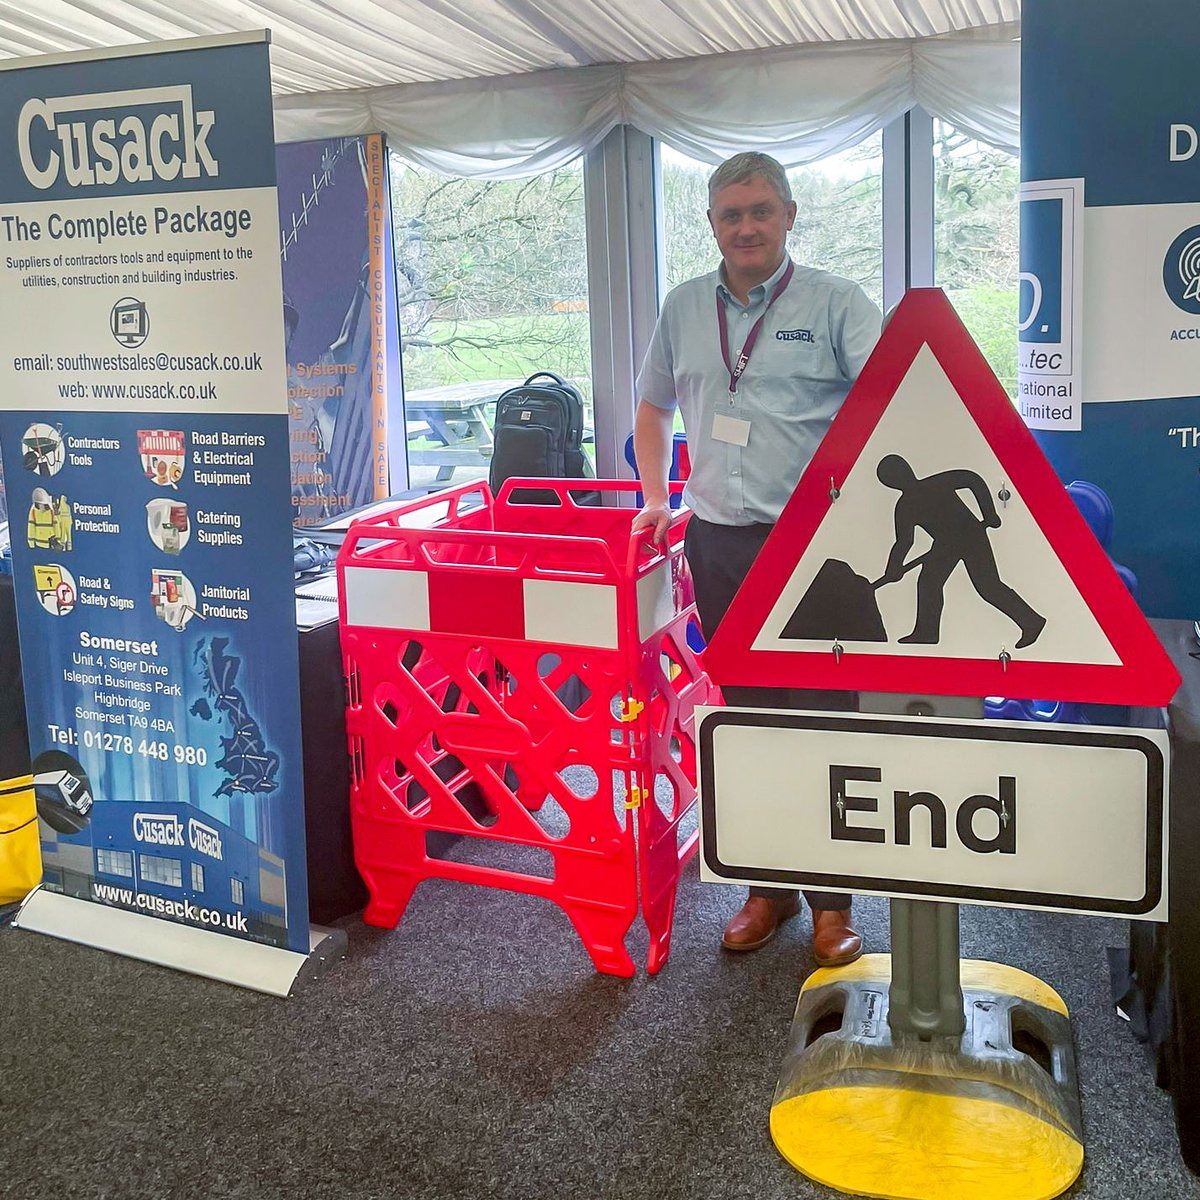 We had an fantastic time showcasing our latest innovations at the SHiFT Group Conference & Expo24 in Coventry! Featurig our state-of-the-art Highway Sign System to our innovative FT Barrier System and Highway Barrier. #pfcusack #manufacturing #safety #worksafety #workprotection